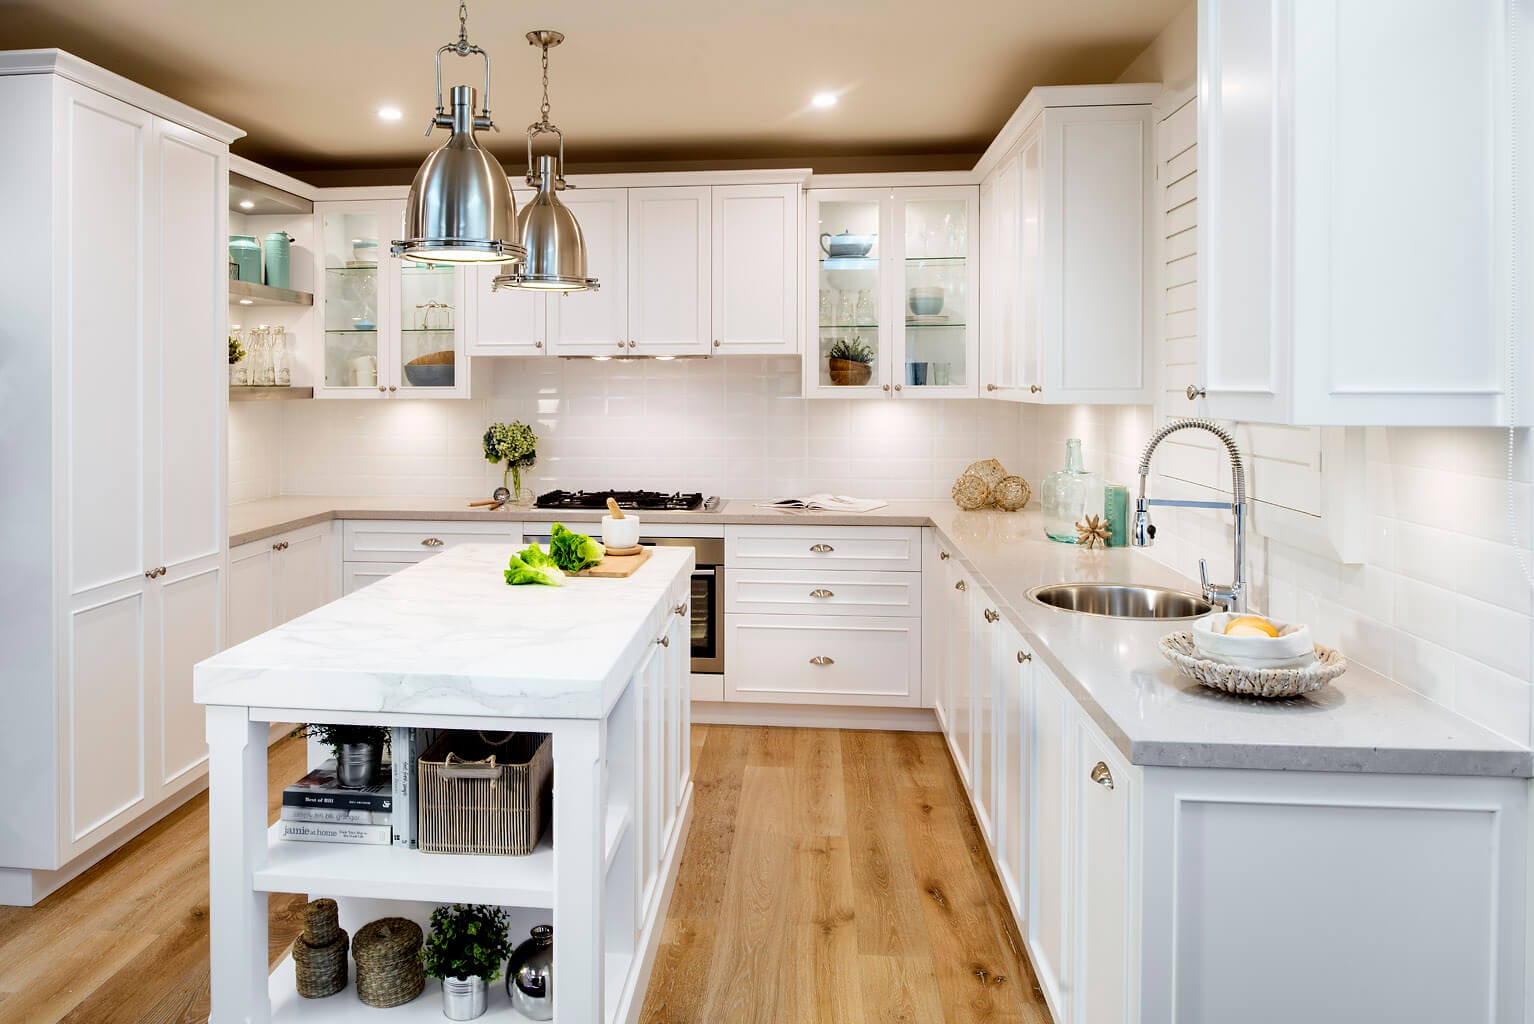 How To Get A Hamptons Kitchen For Less